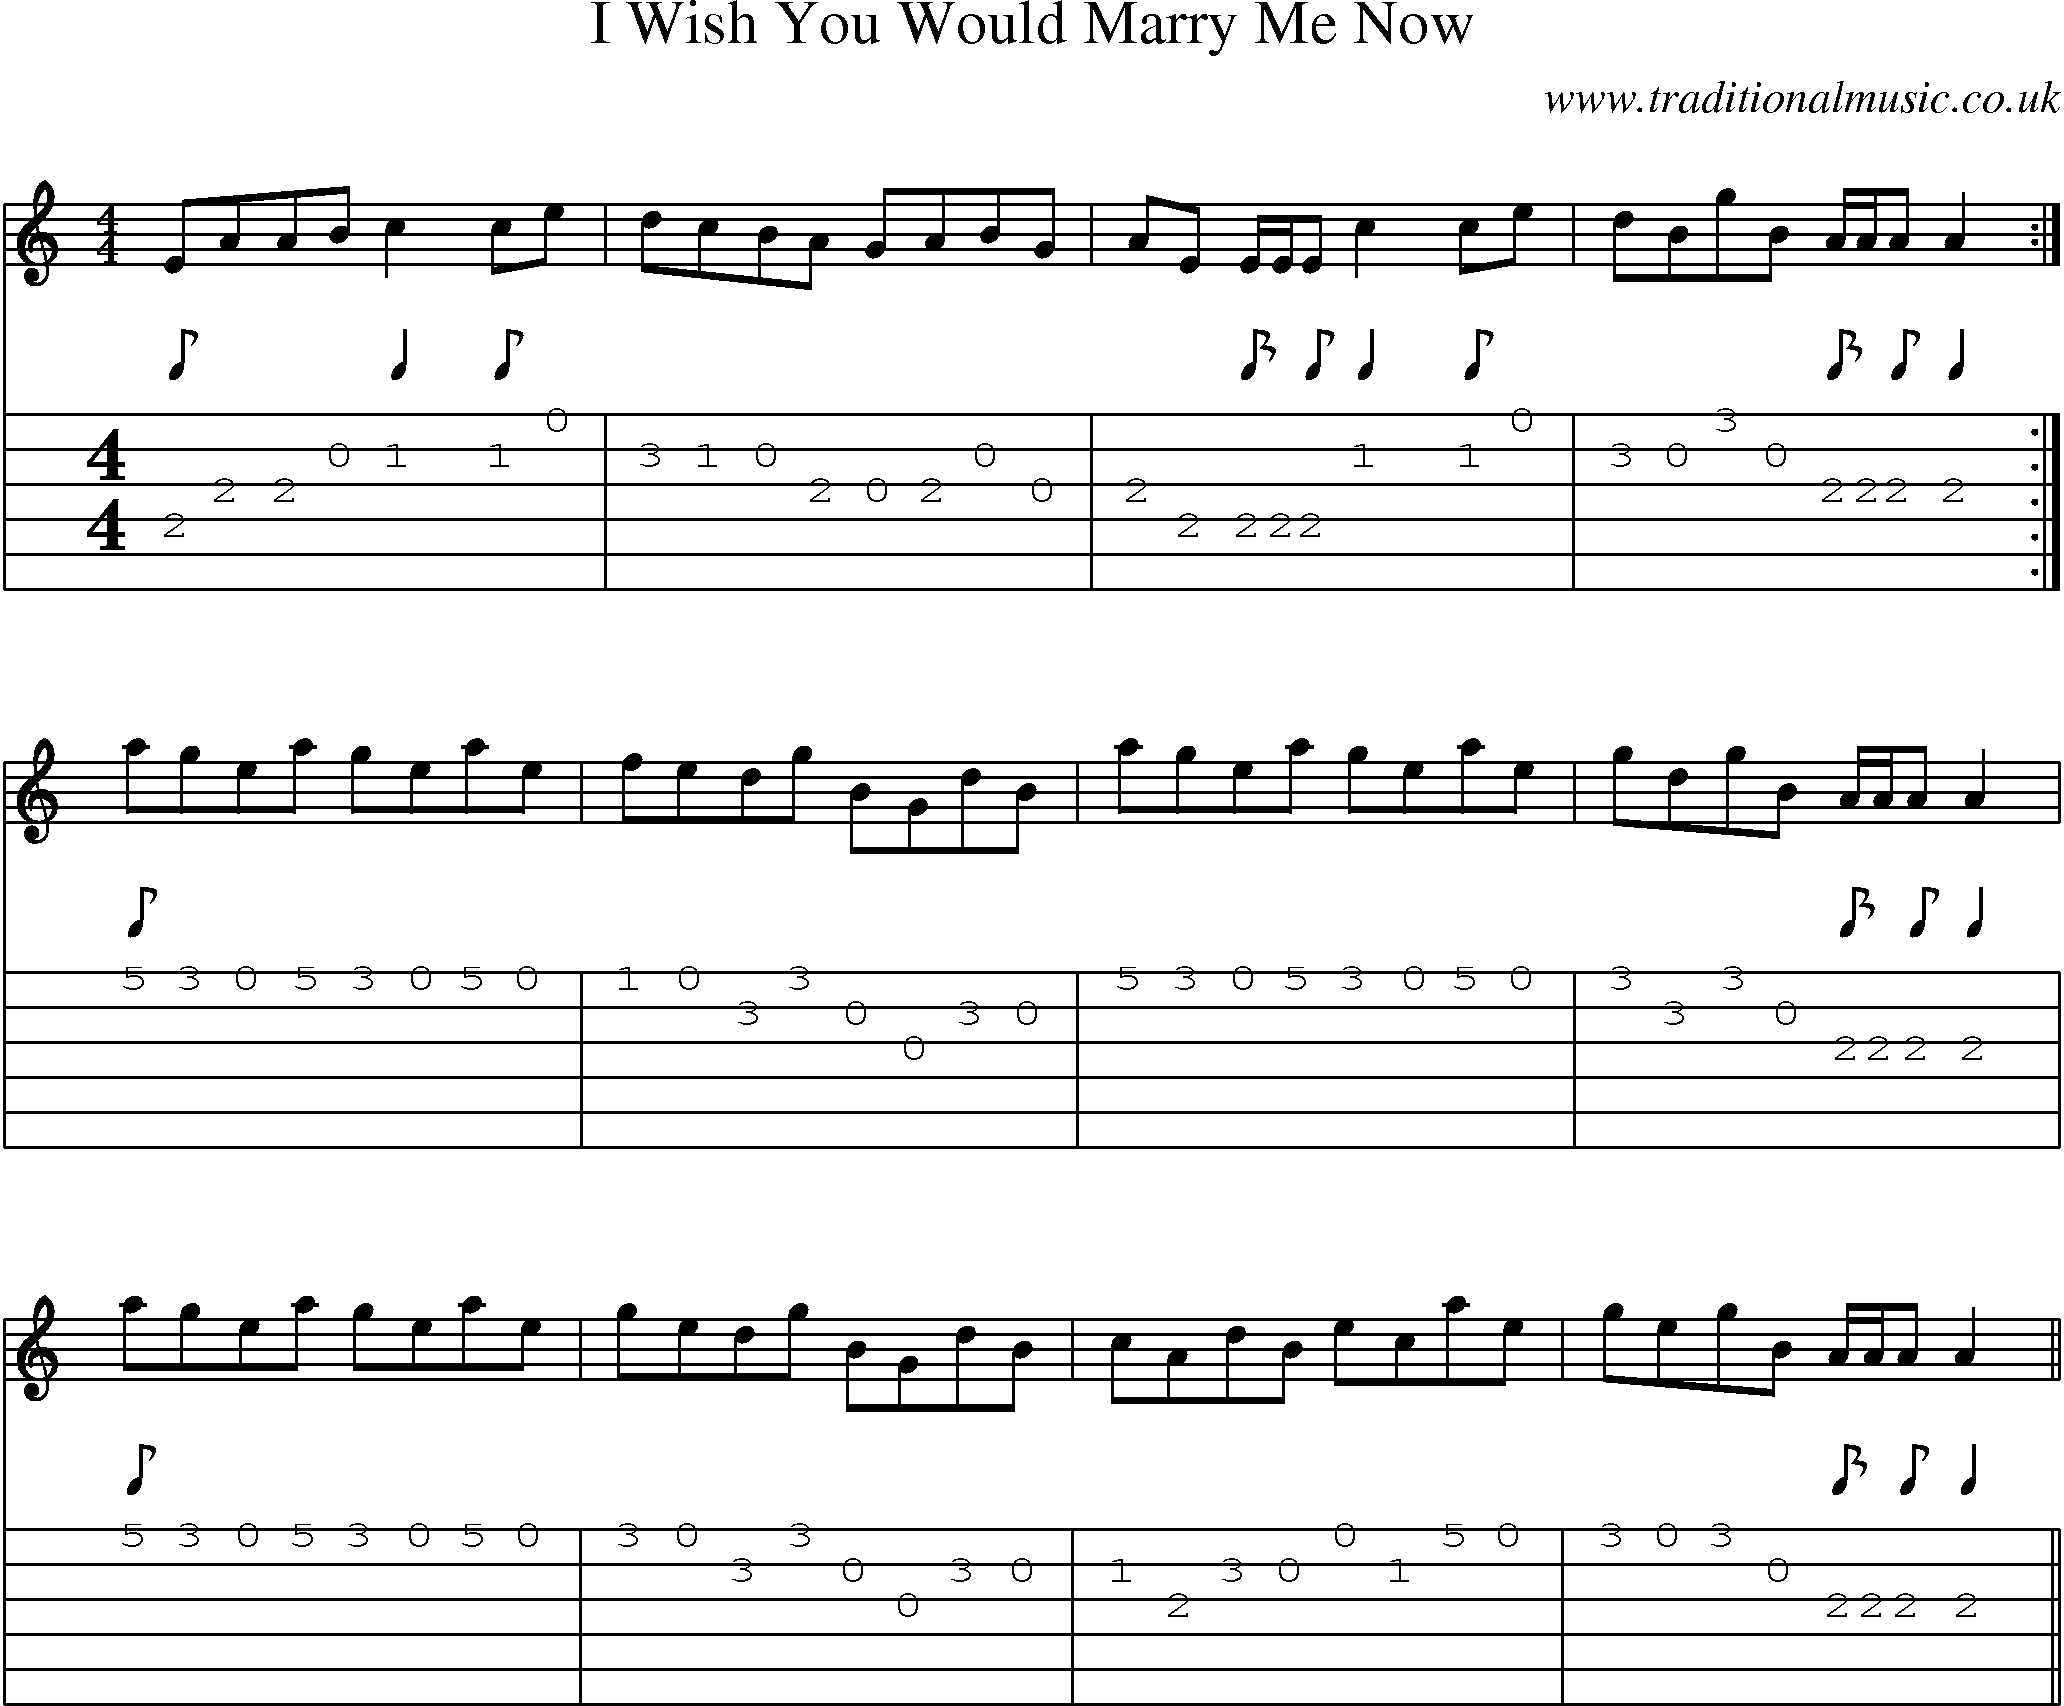 Music Score and Guitar Tabs for I Wish You Would Marry Me Now